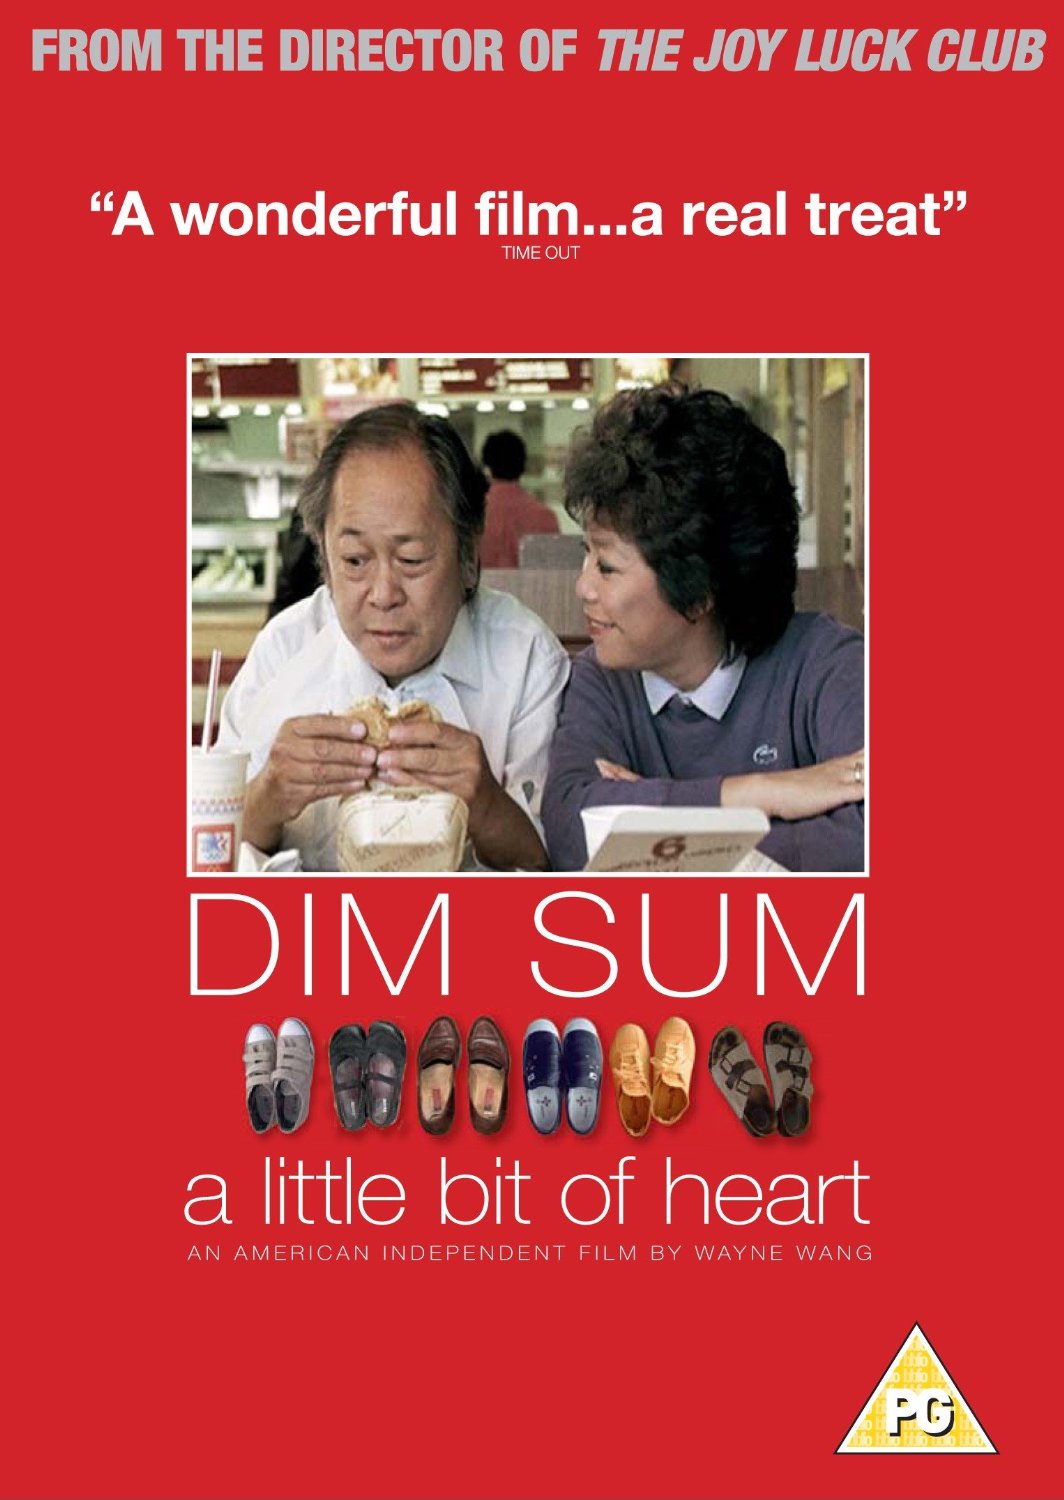 Dim Sum: A Little Bit of Heart (点心, 1985) :: Everything about cinema of Hong Kong, China and Taiwan